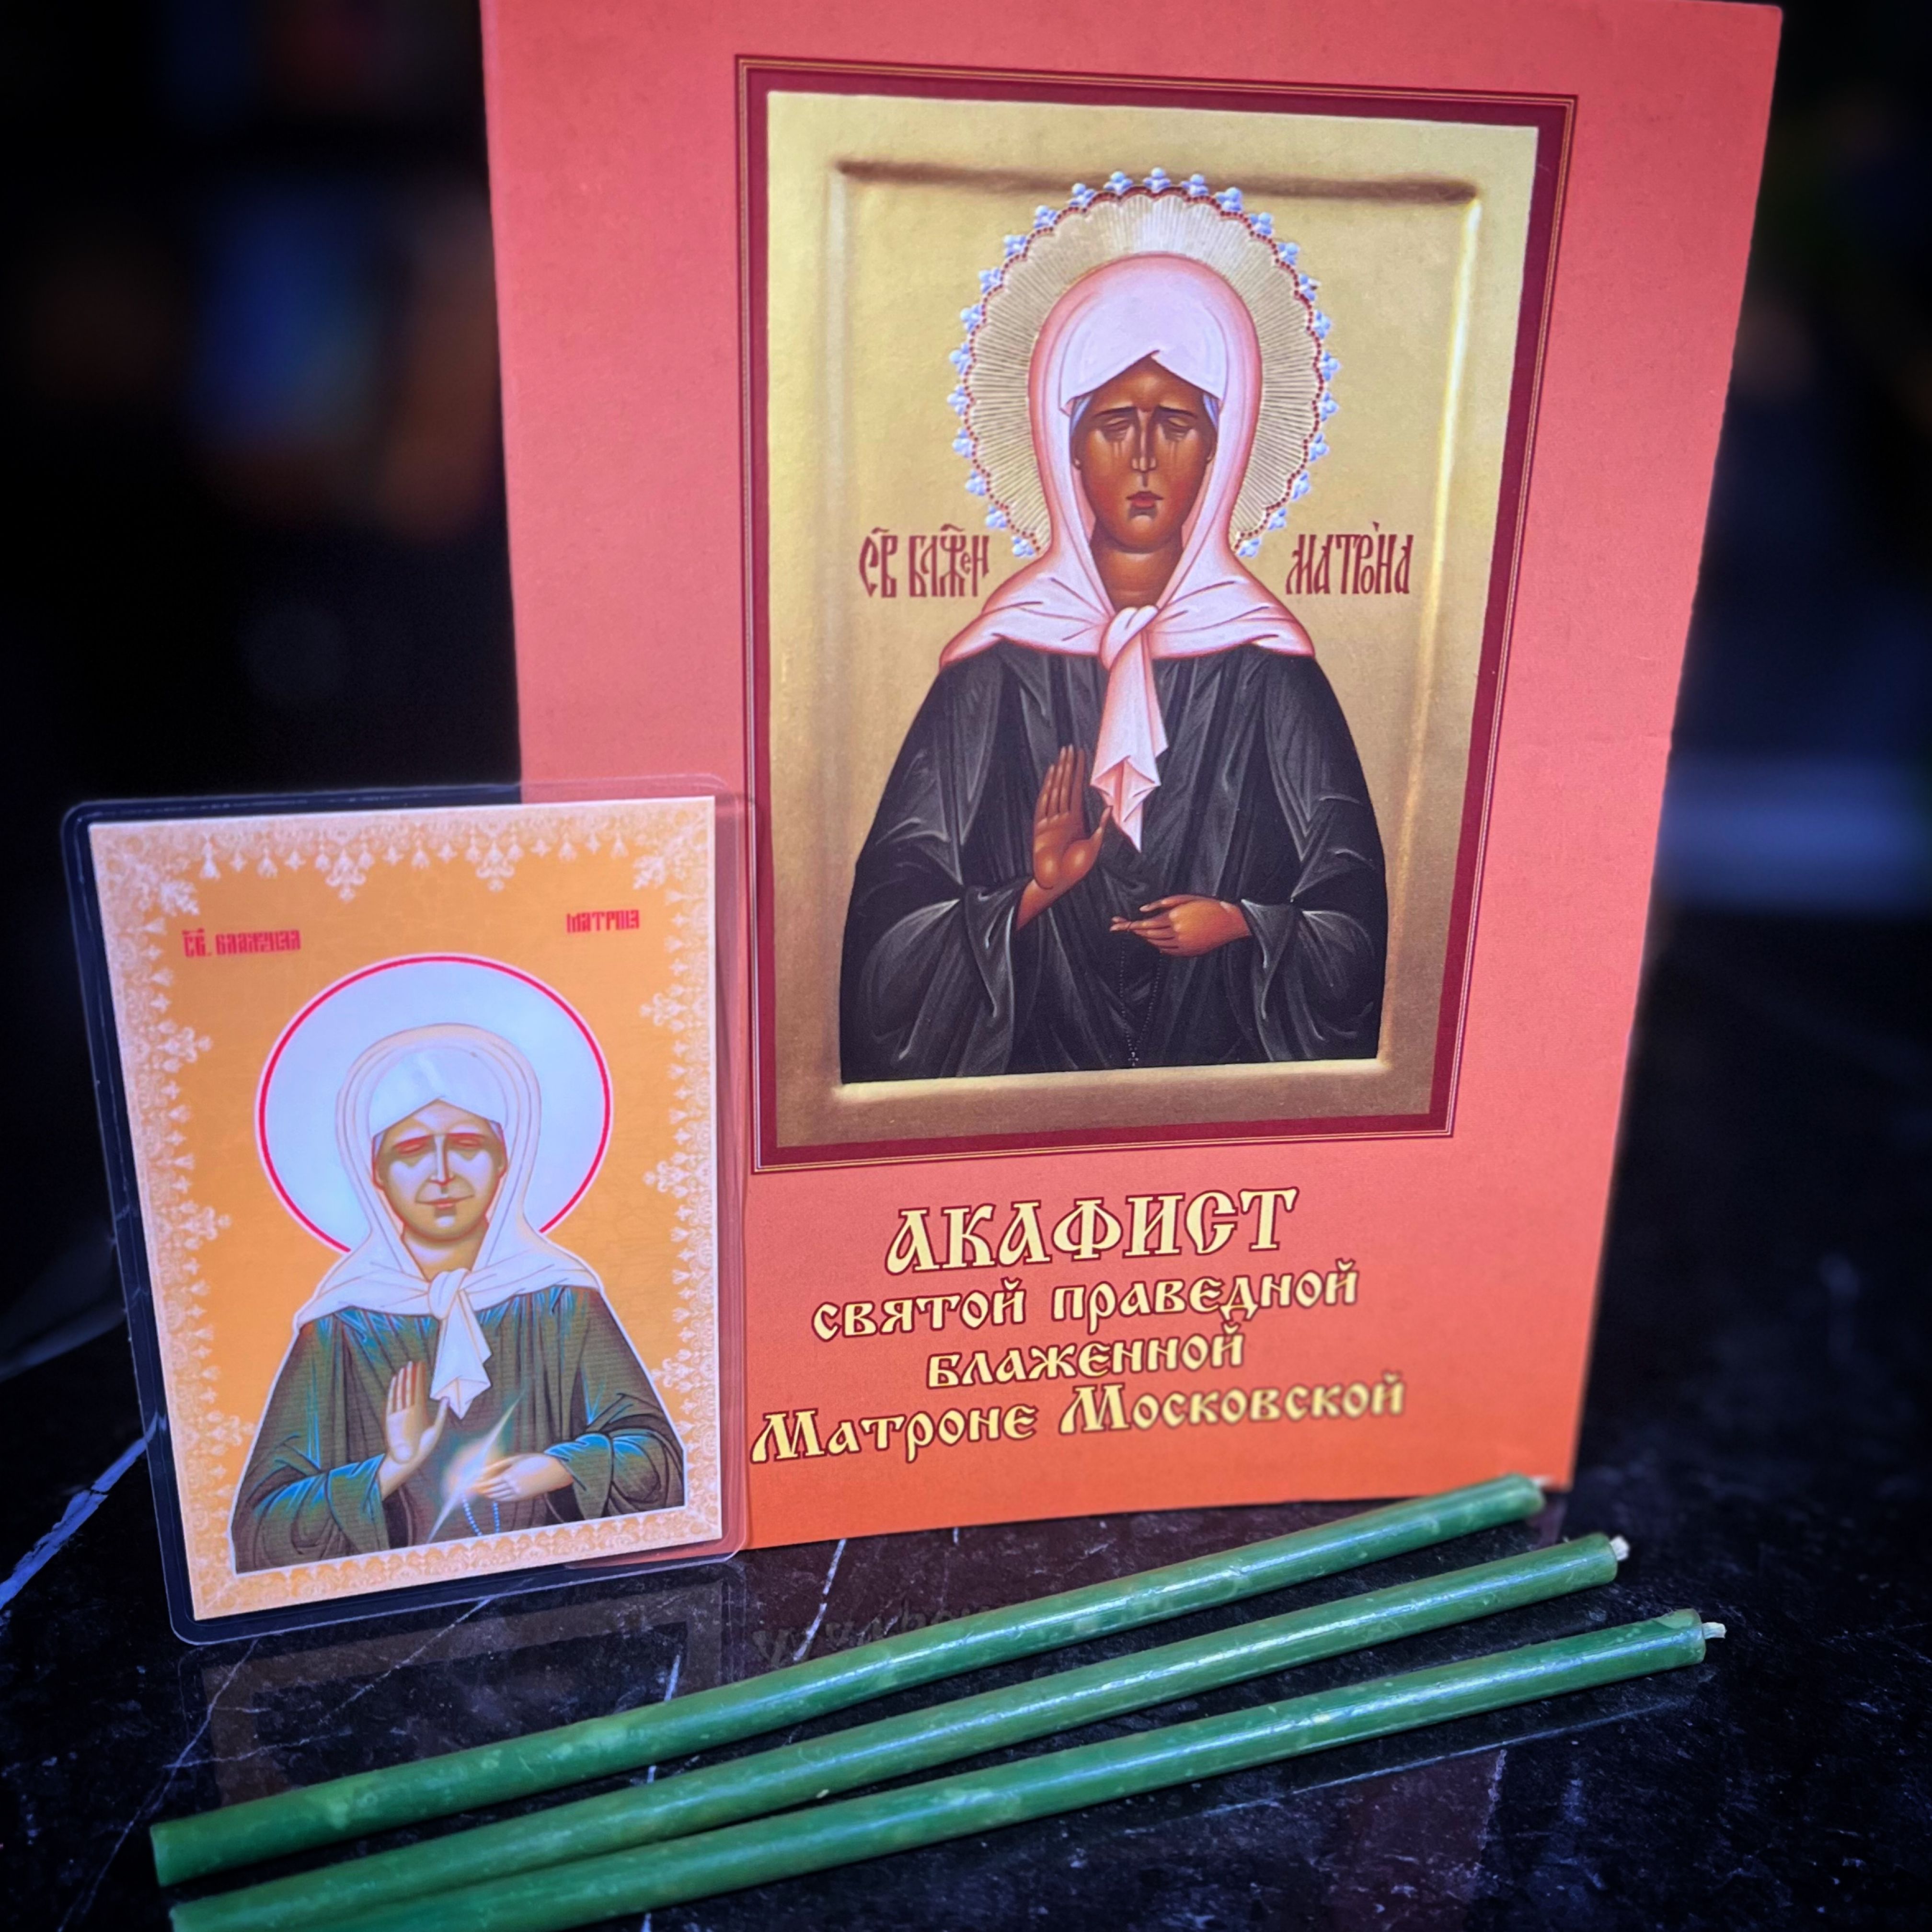 AKATHIST HYMN TO ST MATRONA OF MOSCOW